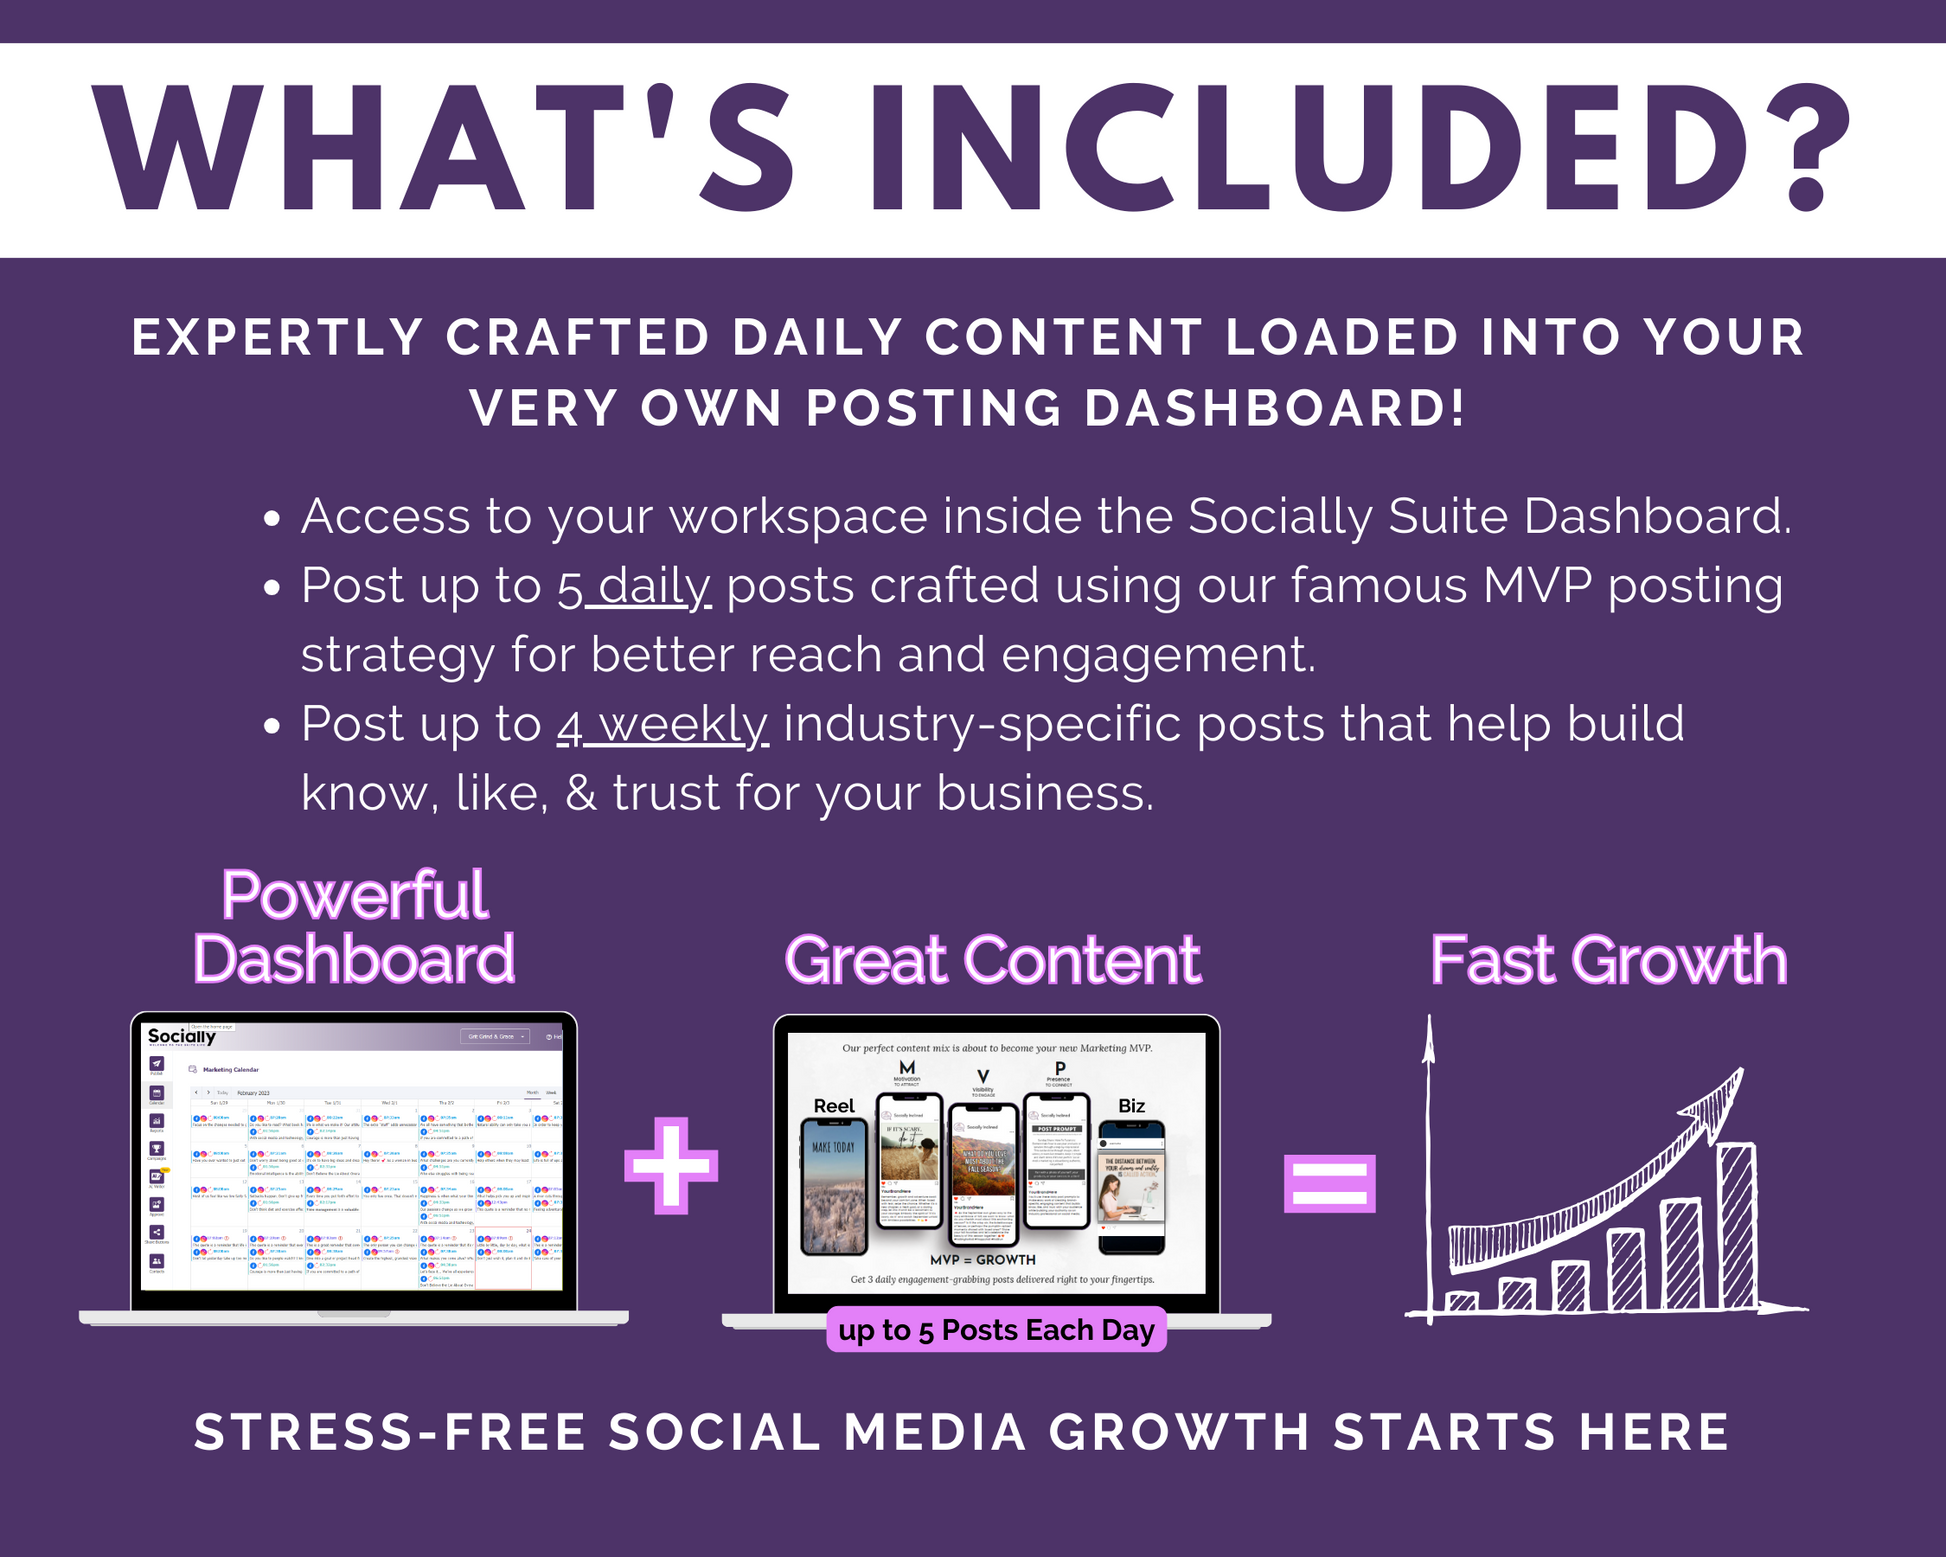 What's included in this package is a comprehensive content management system and social media marketing strategy using the powerful Get Socially Inclined Socially Suite Membership.